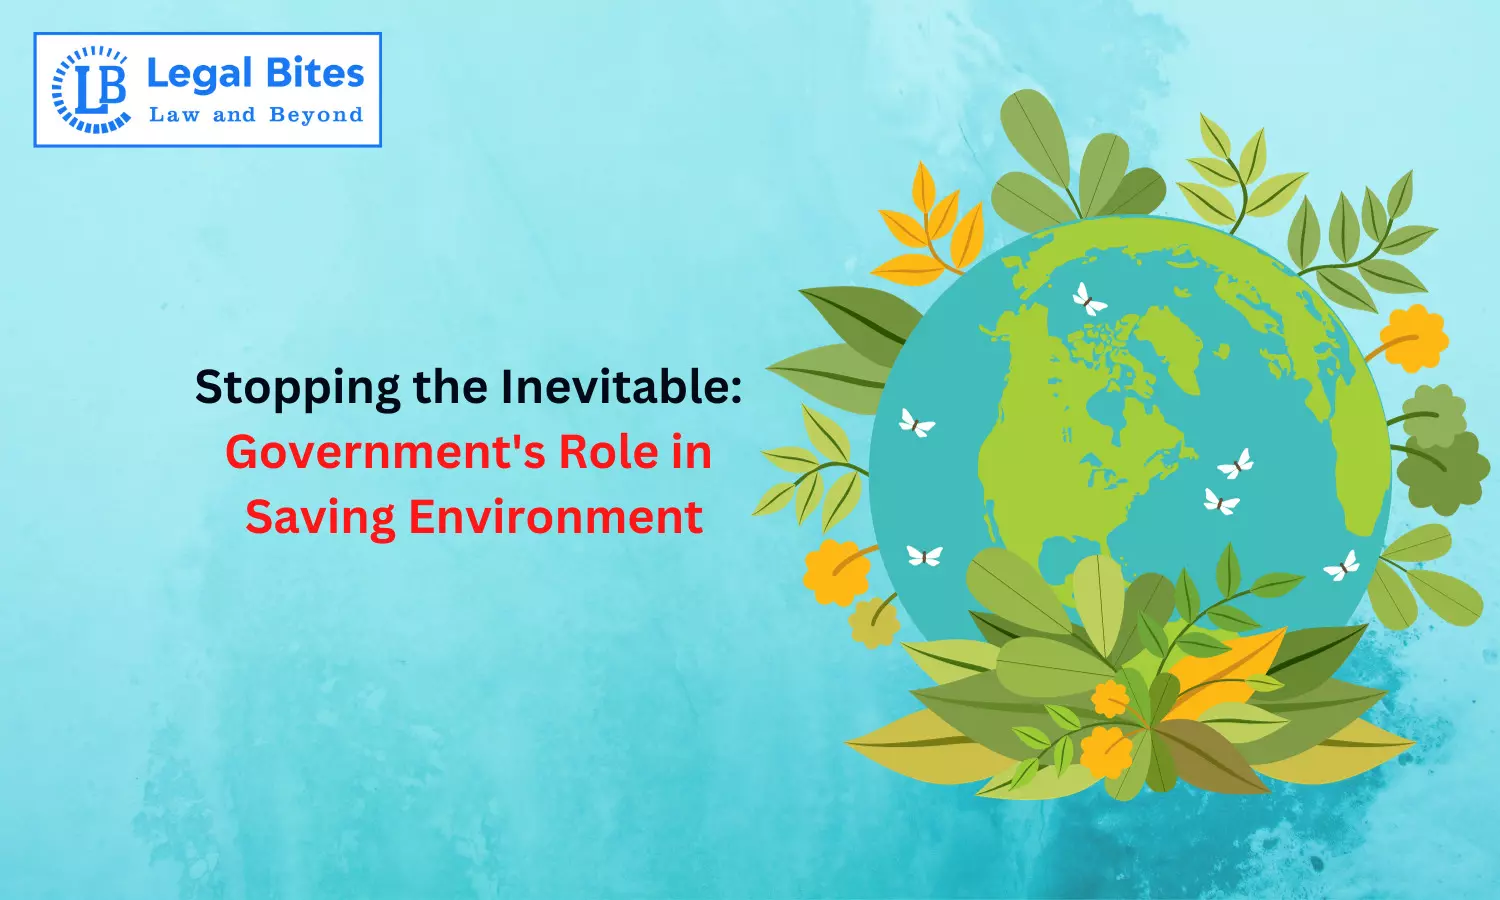 Stopping the Inevitable: Governments Role in Saving Environment